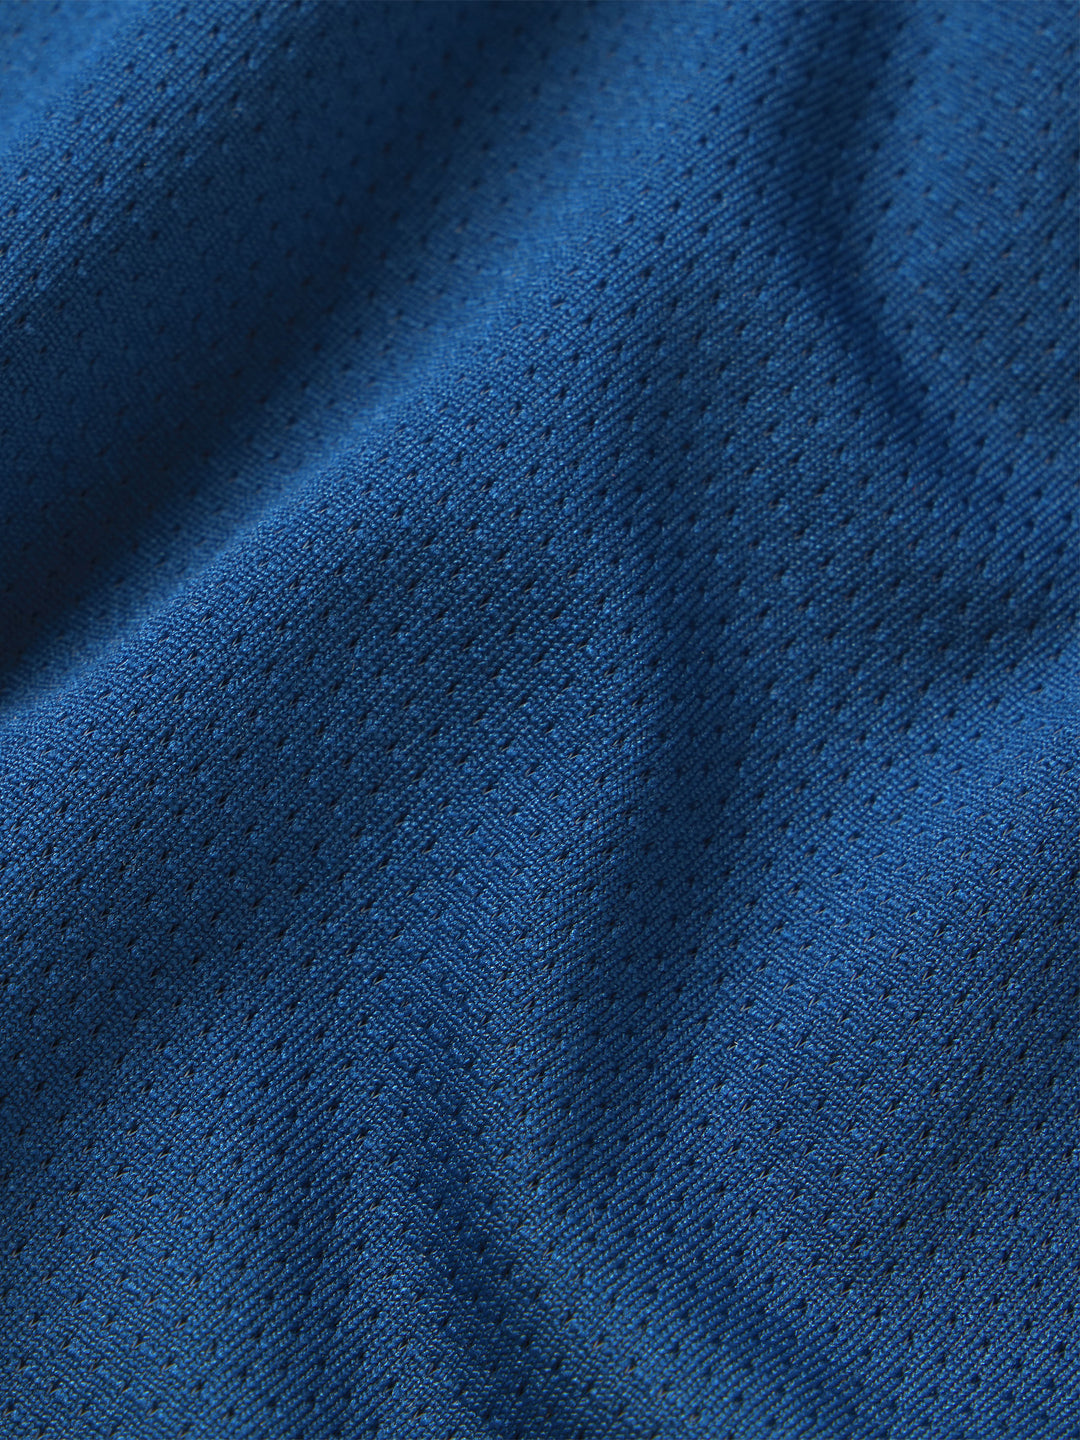 Detailed texture of PB5star's astral blue Core Performance Tee fabric, highlighting the quality weave for pickleball apparel.